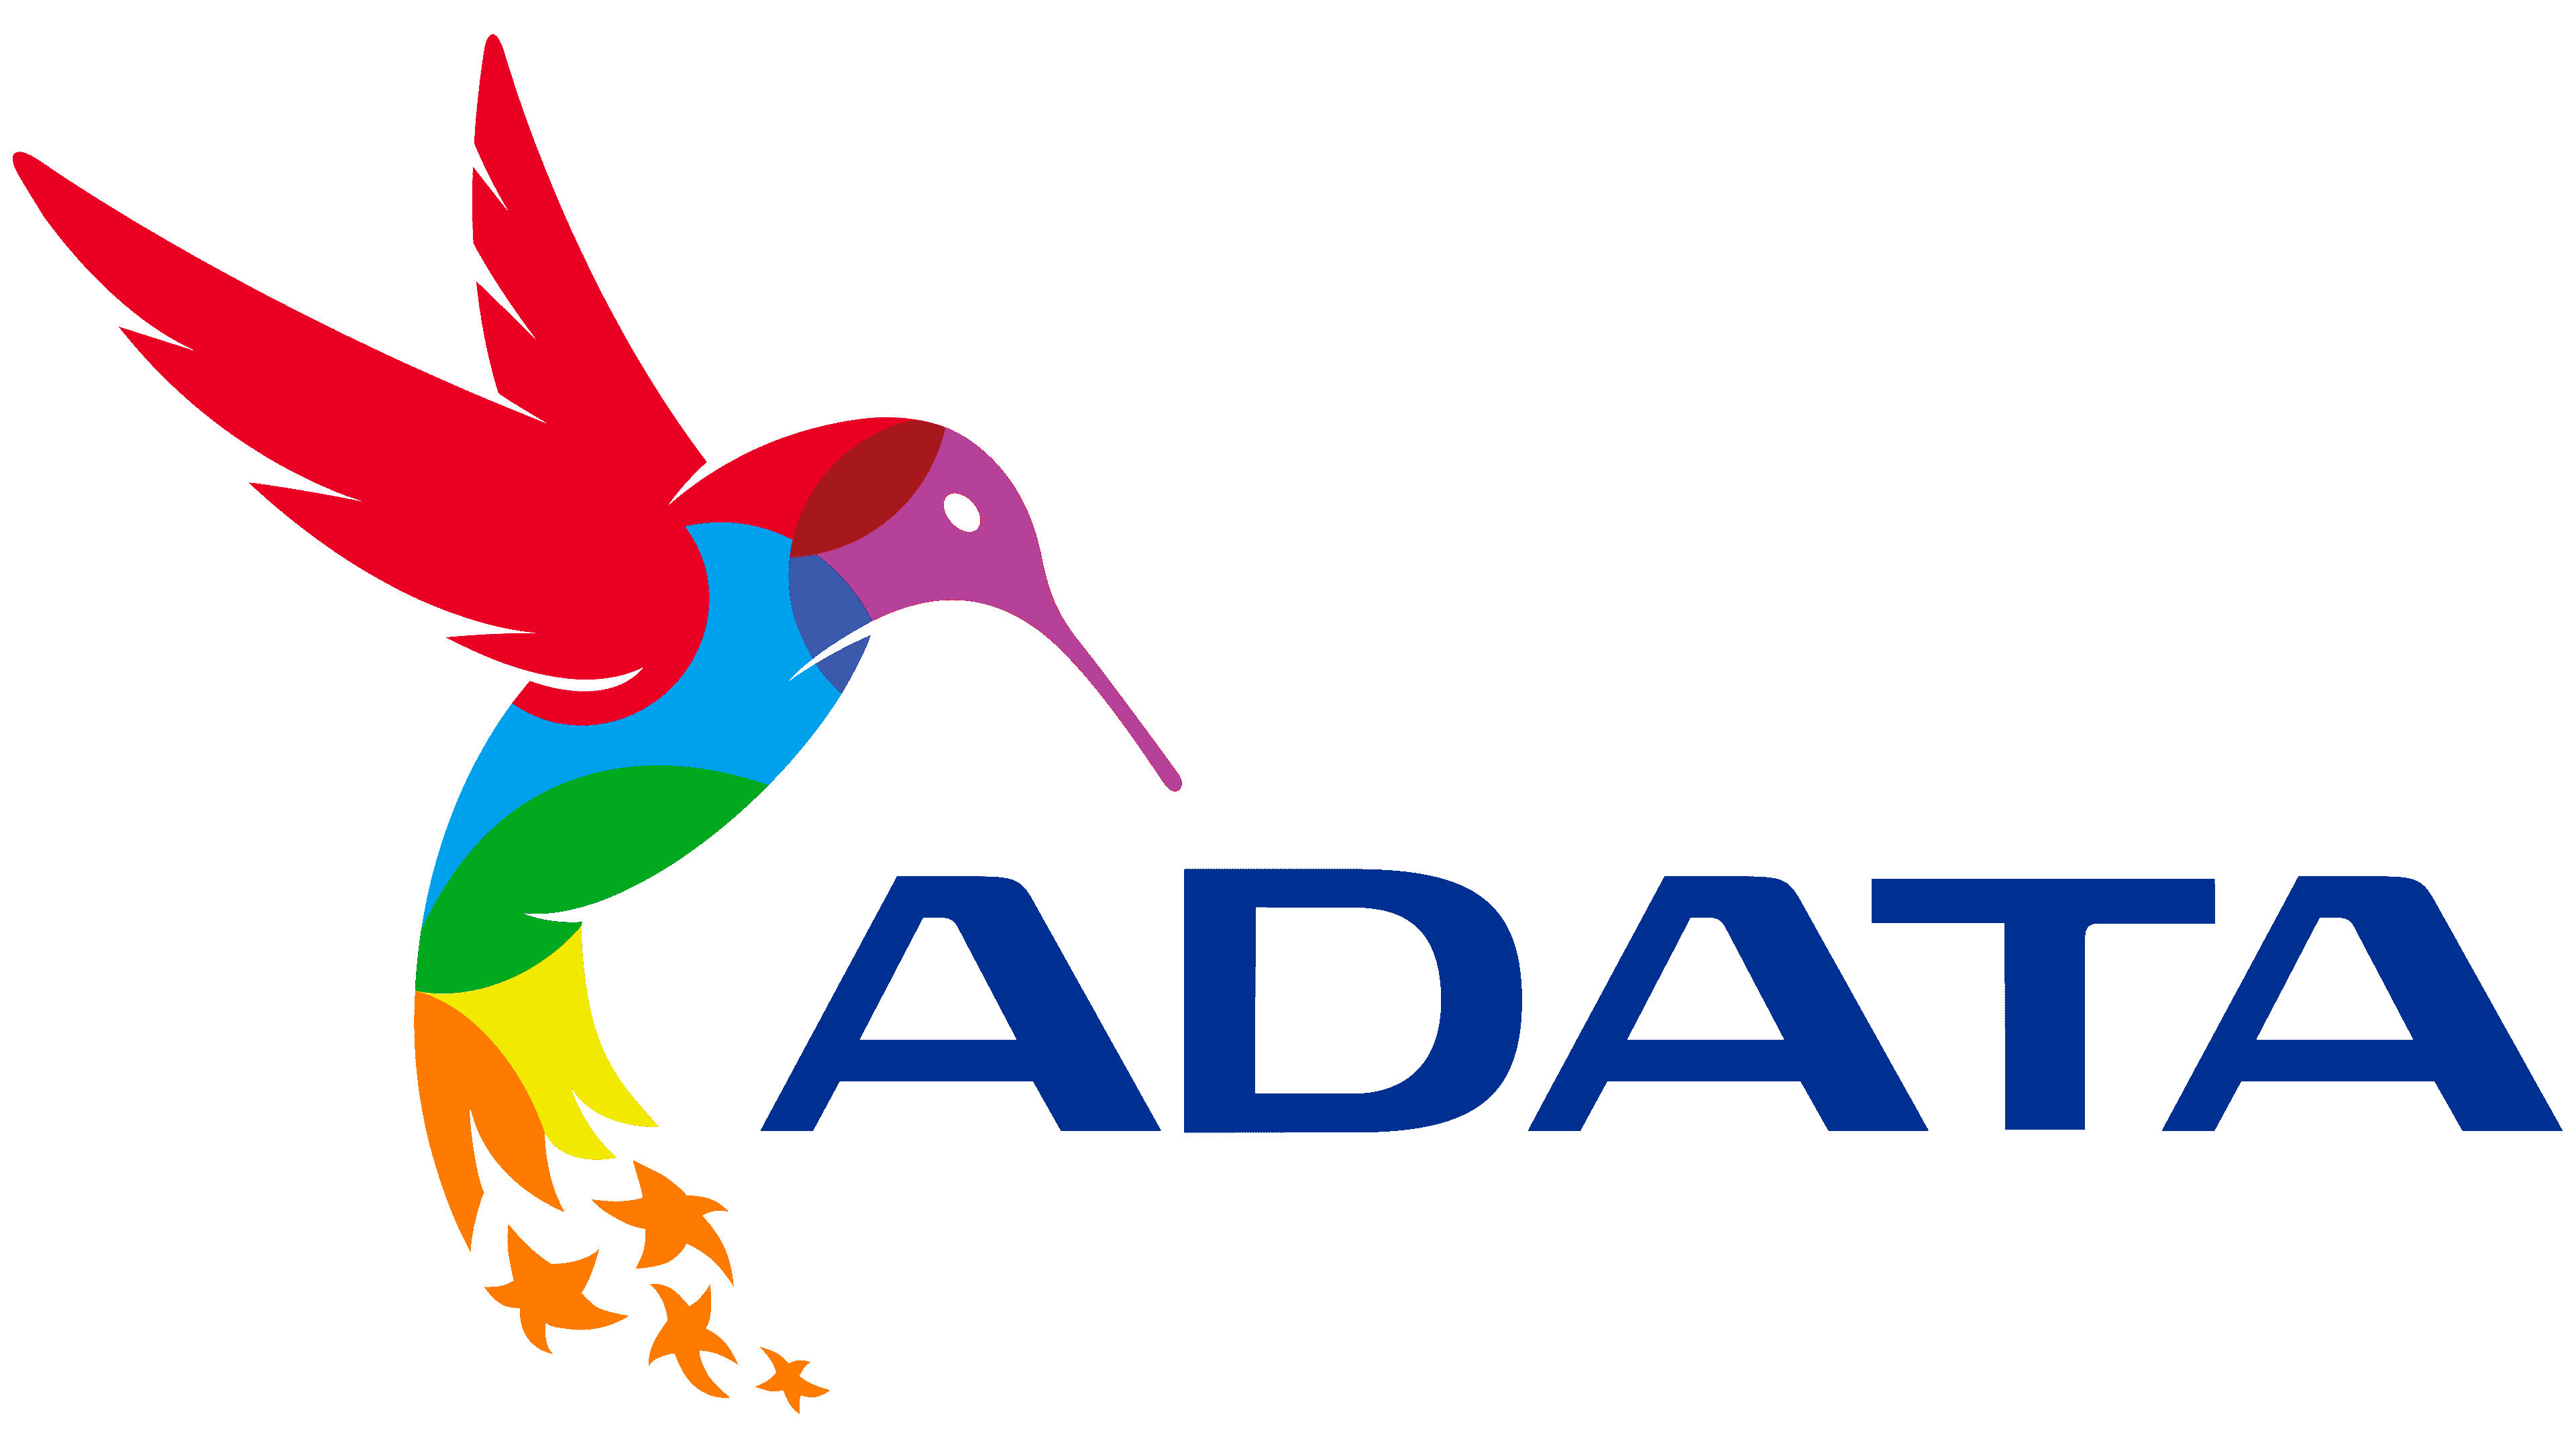 ADATA Logo, symbol, meaning, history, PNG